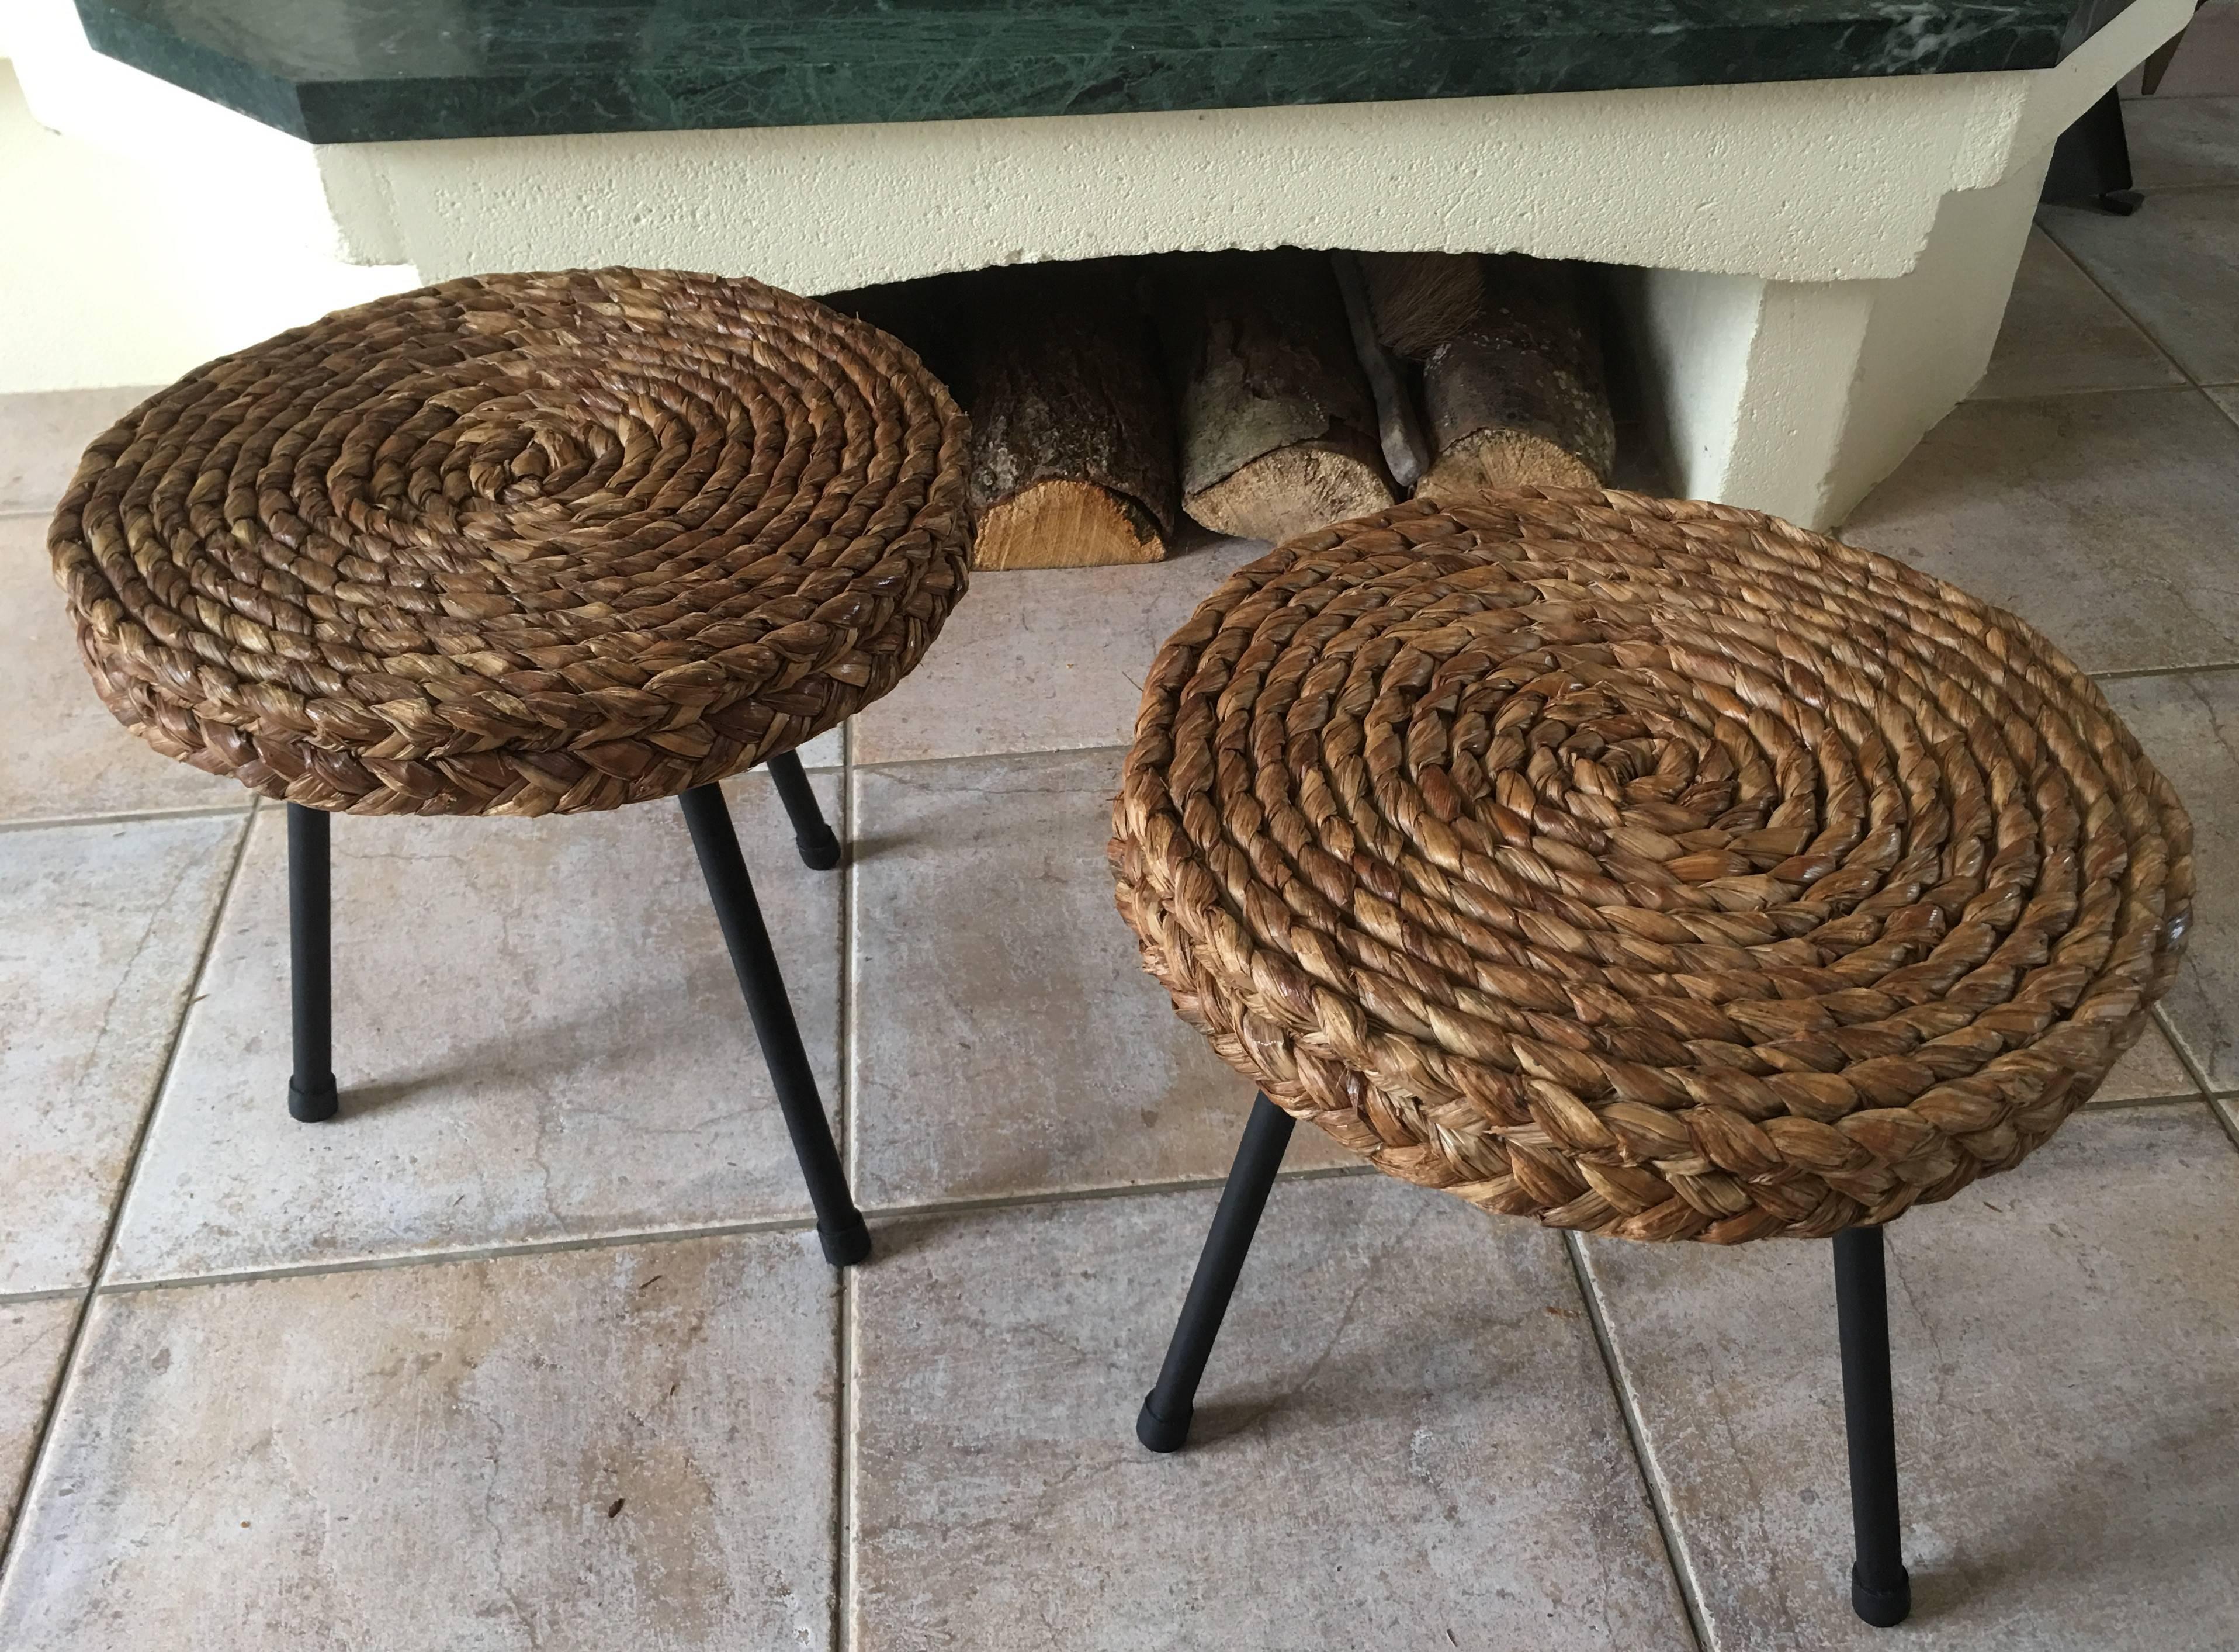 Original pair of rattan stools based on three black painted metal. It comes from a French riviera house and is attributed to Adrien Audoux and Frida Minet, French designers at Golf Juan in the 1950s
The rattan is in very good original condition. The